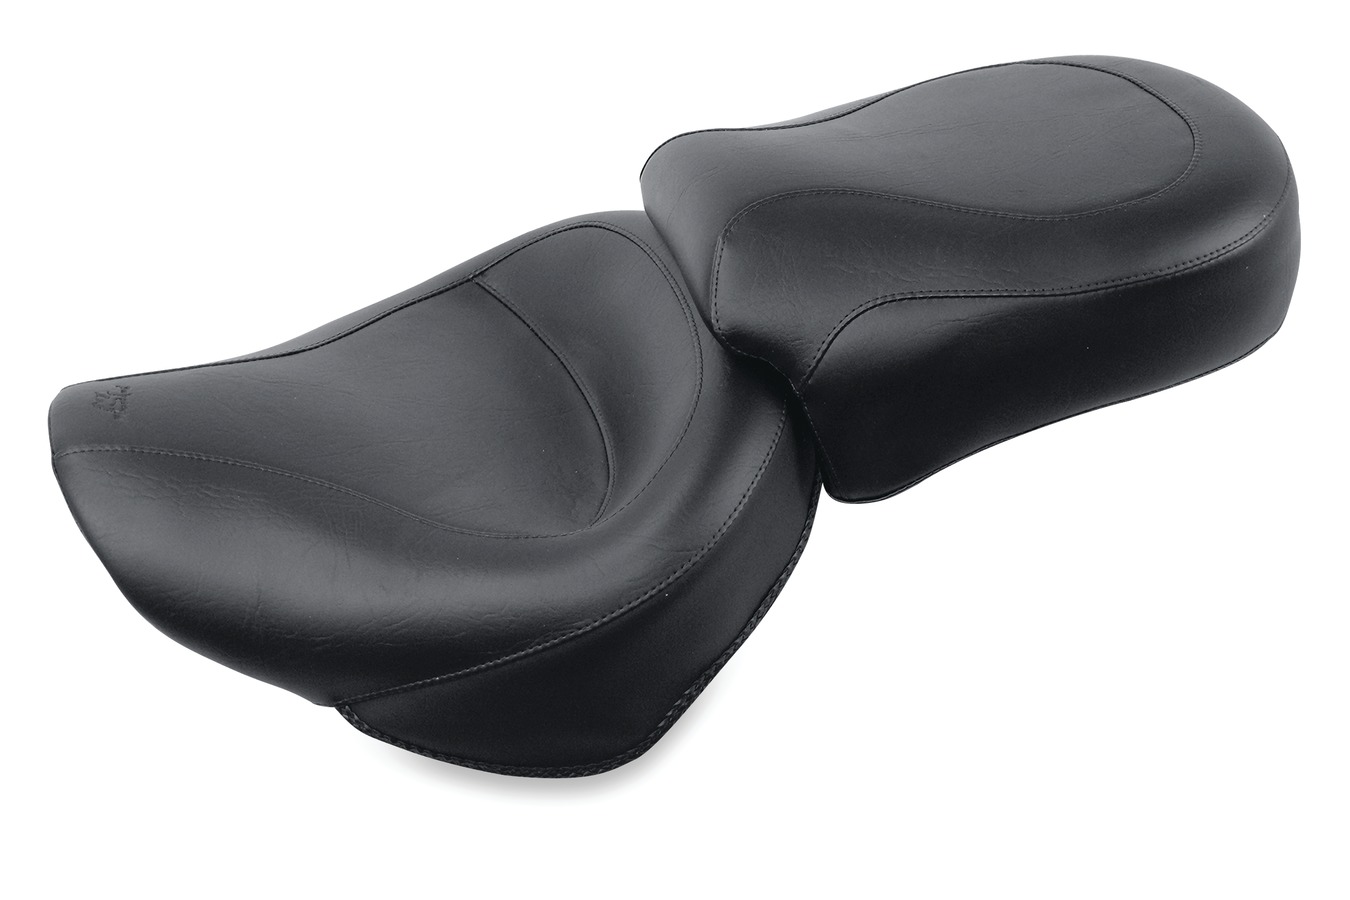 Motorcycle Seats & Accessories | Handmade in the USA | Mustang Seats